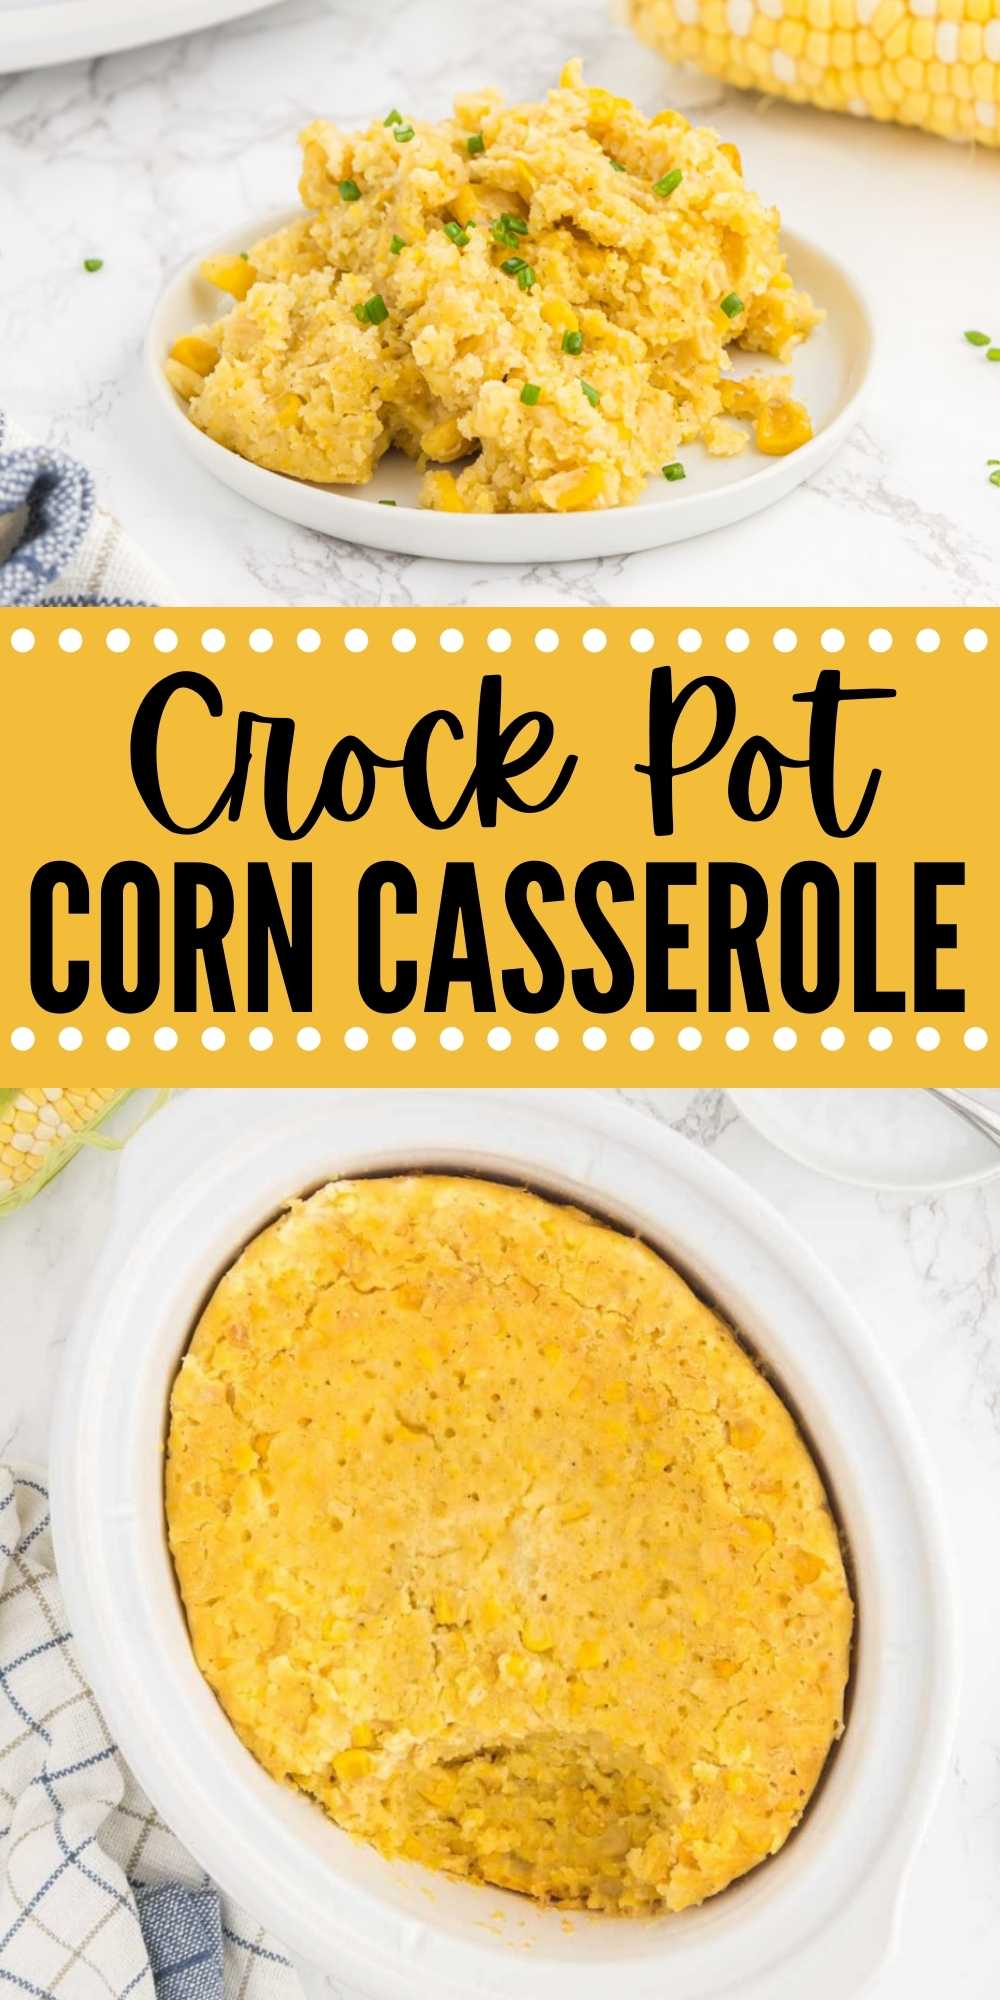 Crockpot Corn Casserole is a classic holiday side dish that is made in your slow cooker. Creamy, delicious and lots of sweet corn flavor. Corn Casserole is made with Jiffy cornbread mix and is easy to make. #eatingonadime #jiffycorncasserole #crockpotrecipes